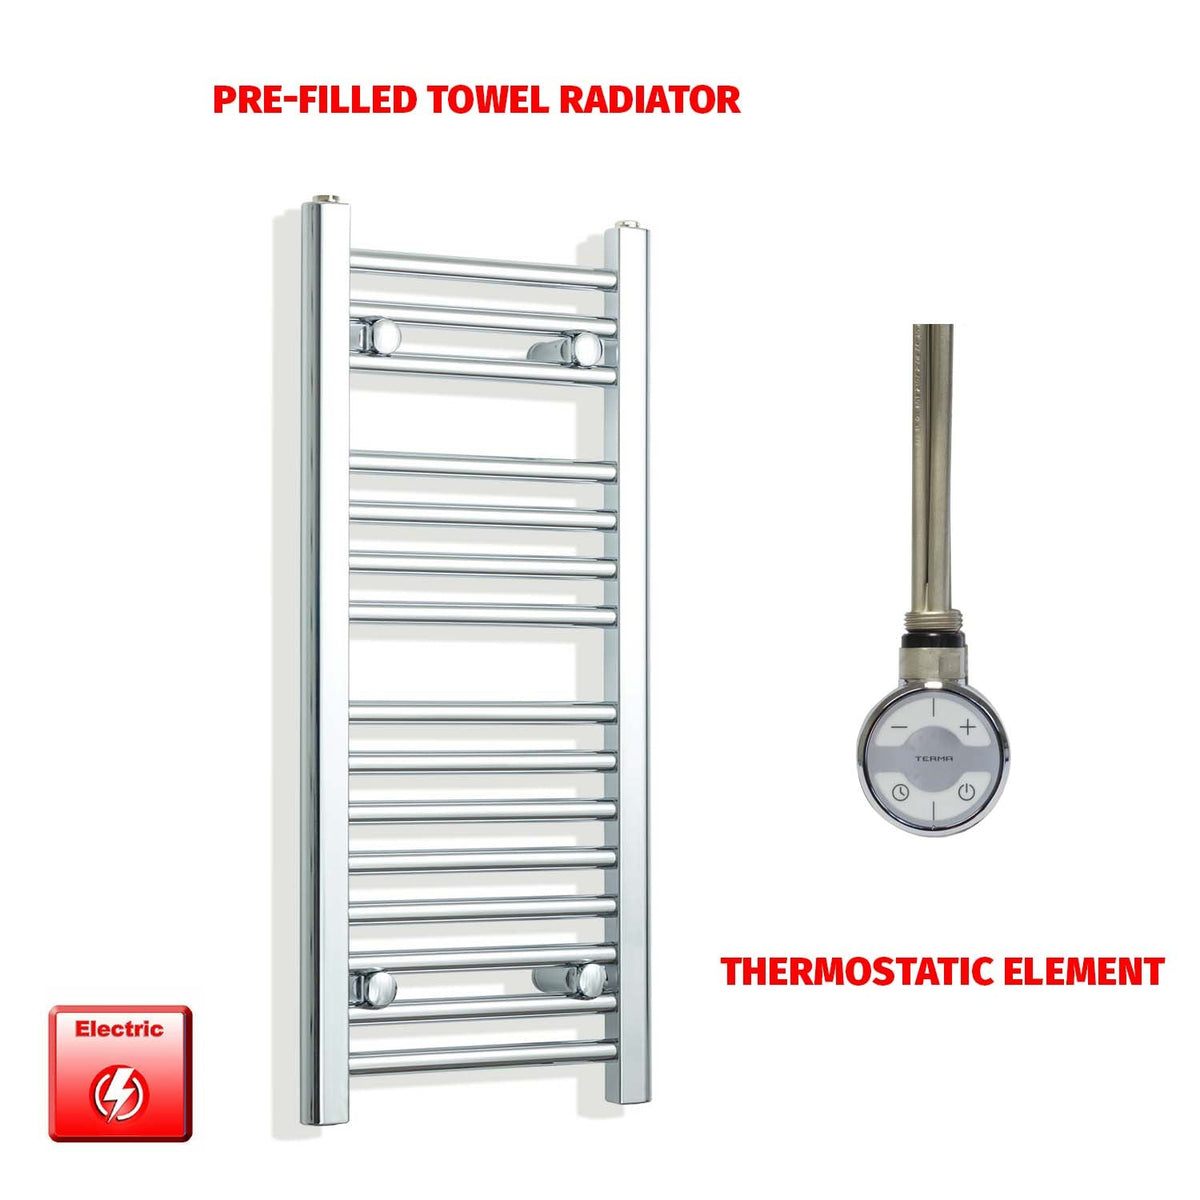 800mm High 350mm Wide Pre-Filled Electric Heated Towel Rail Radiator Straight Chrome MOA Thermostatic element no timer